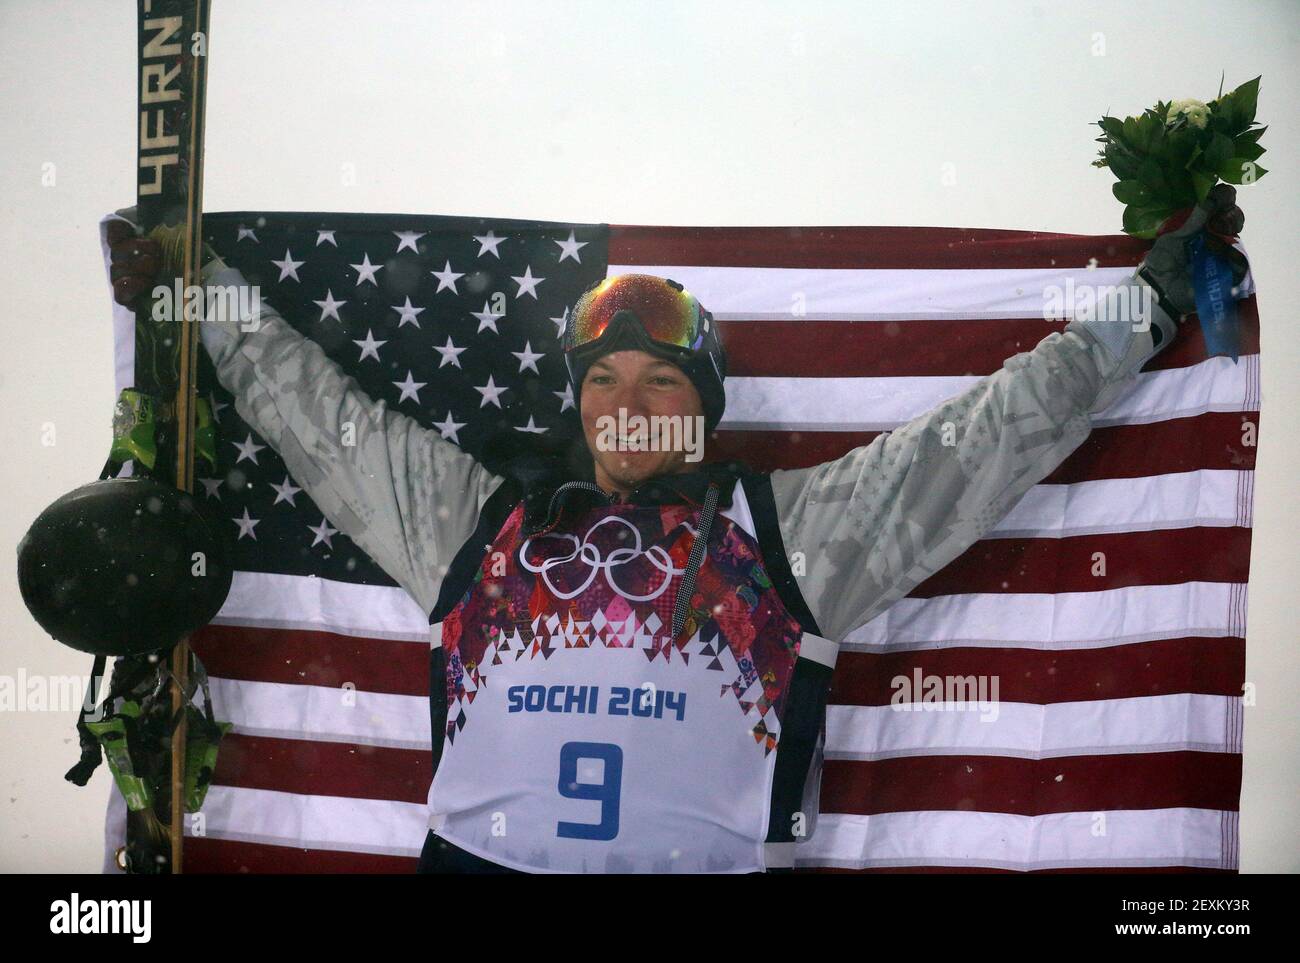 David Wise of the USA celebrates winning the gold medal in men's ski halfpipe at Rosa Khutor Extreme Park during the Winter Olympics in Sochi, Russia, Tuesday, Feb. 18, 2014. (Photo by Brian Cassella/Chicago Tribune/MCT/Sipa USA) Stock Photo